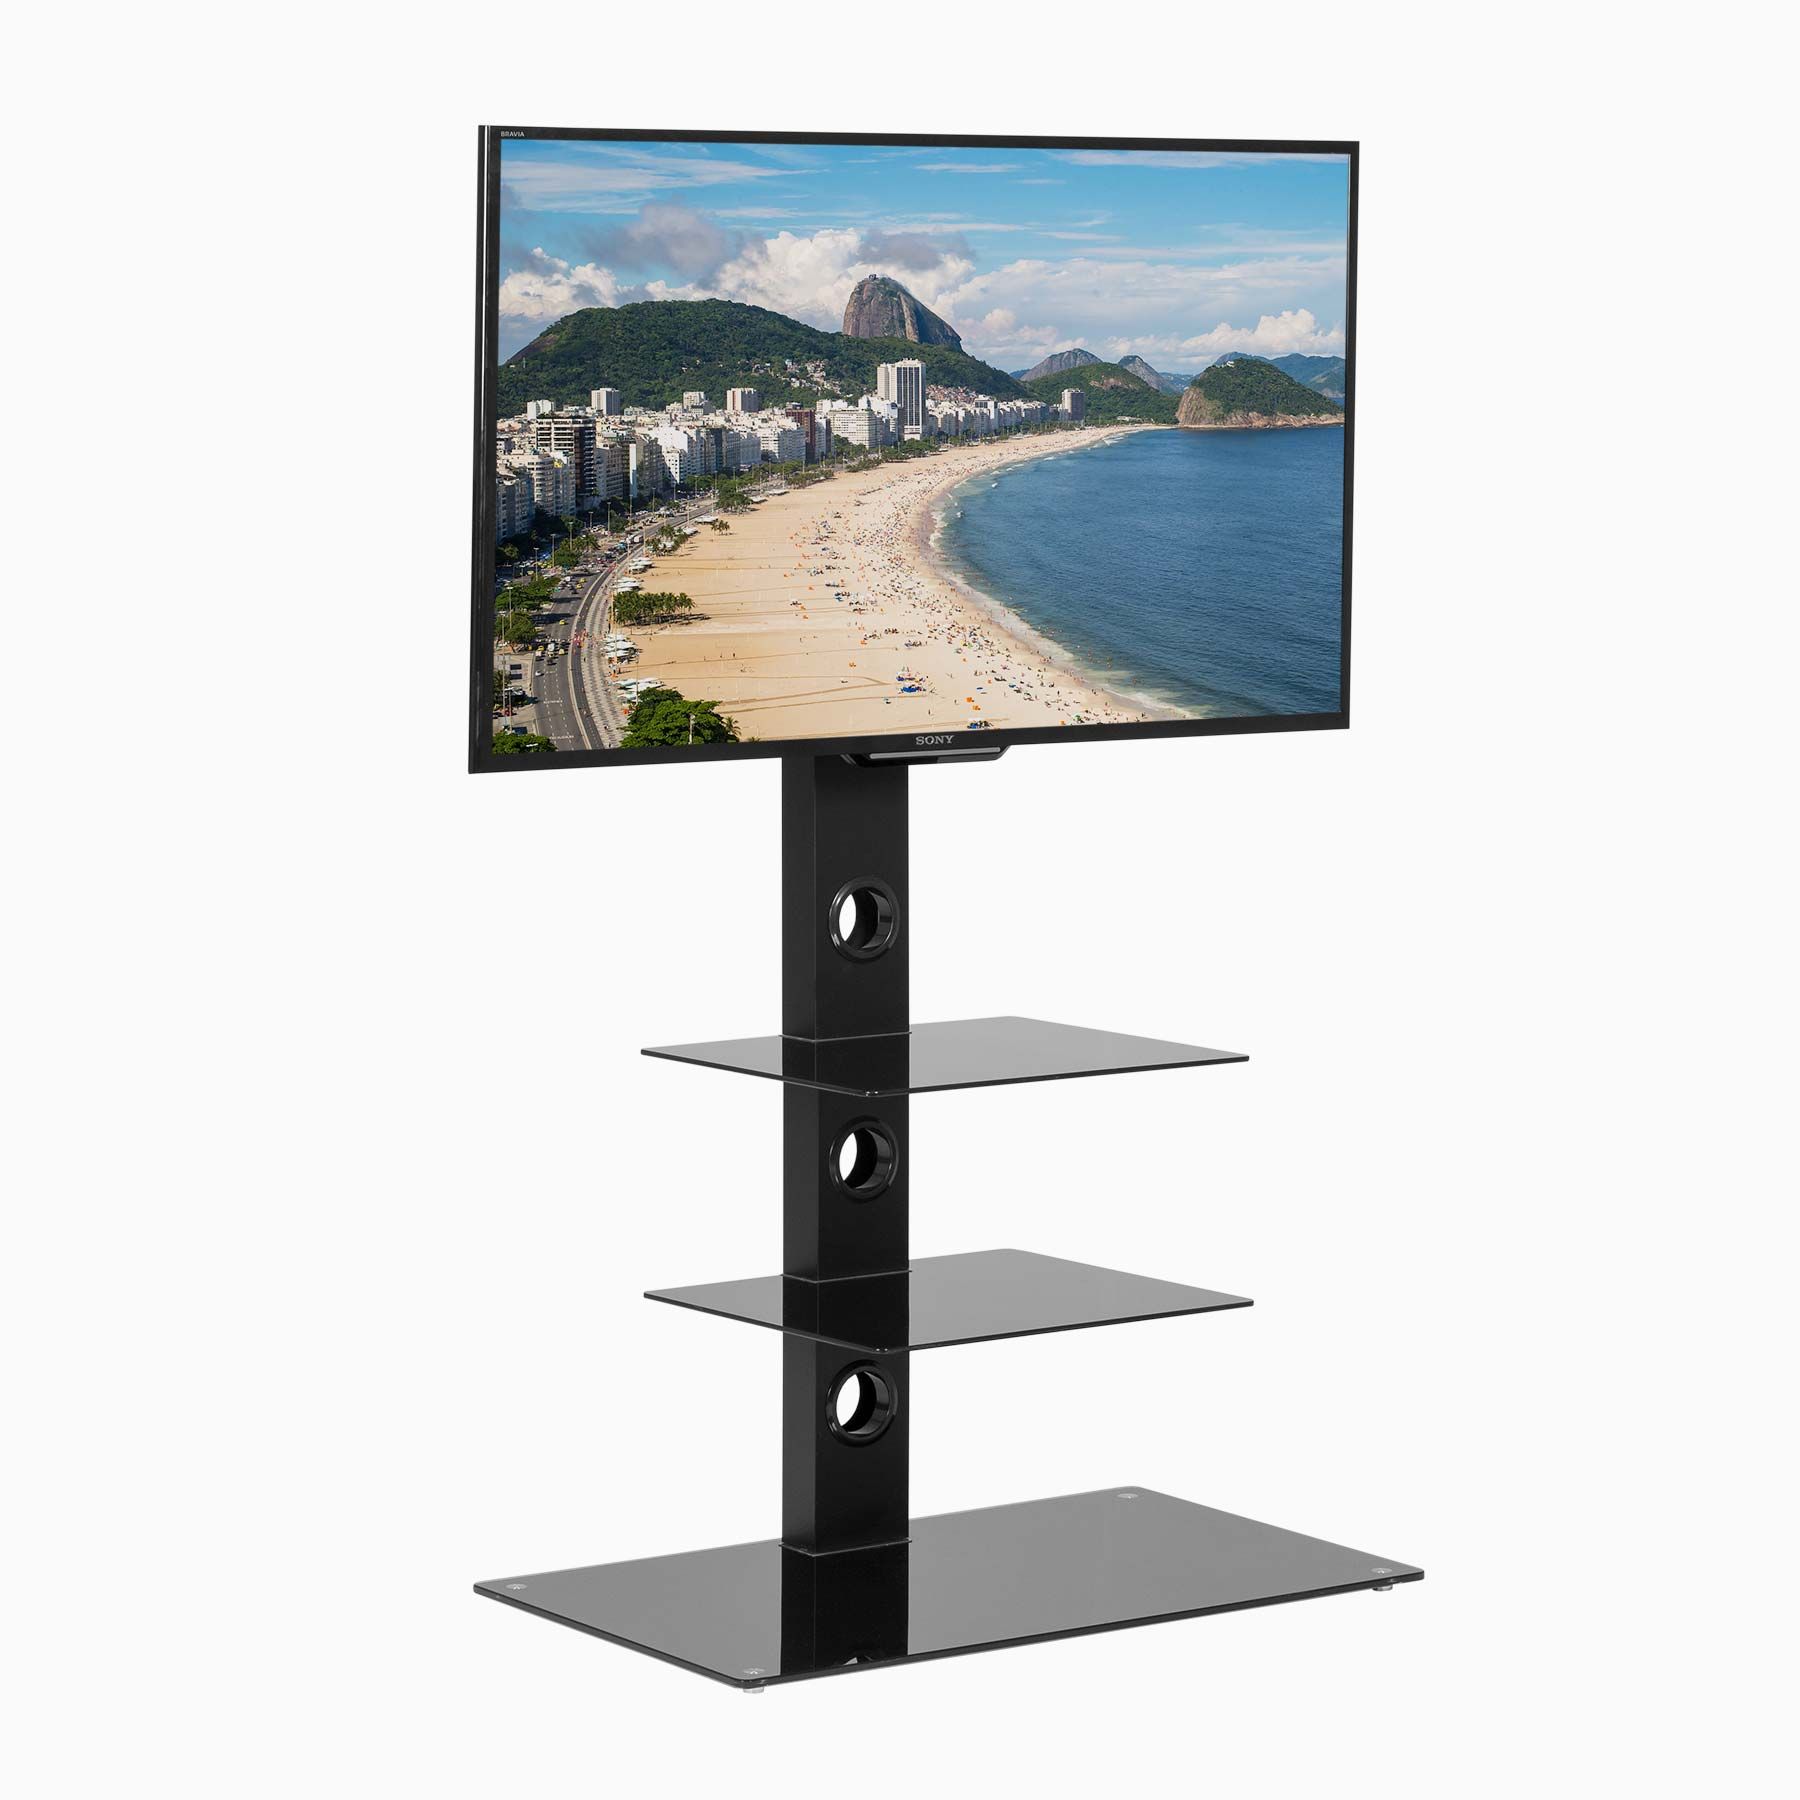 Black Glass Cantilever Tv Stand | Mmt Cbm3 Within Cantilever Glass Tv Stand (View 14 of 15)